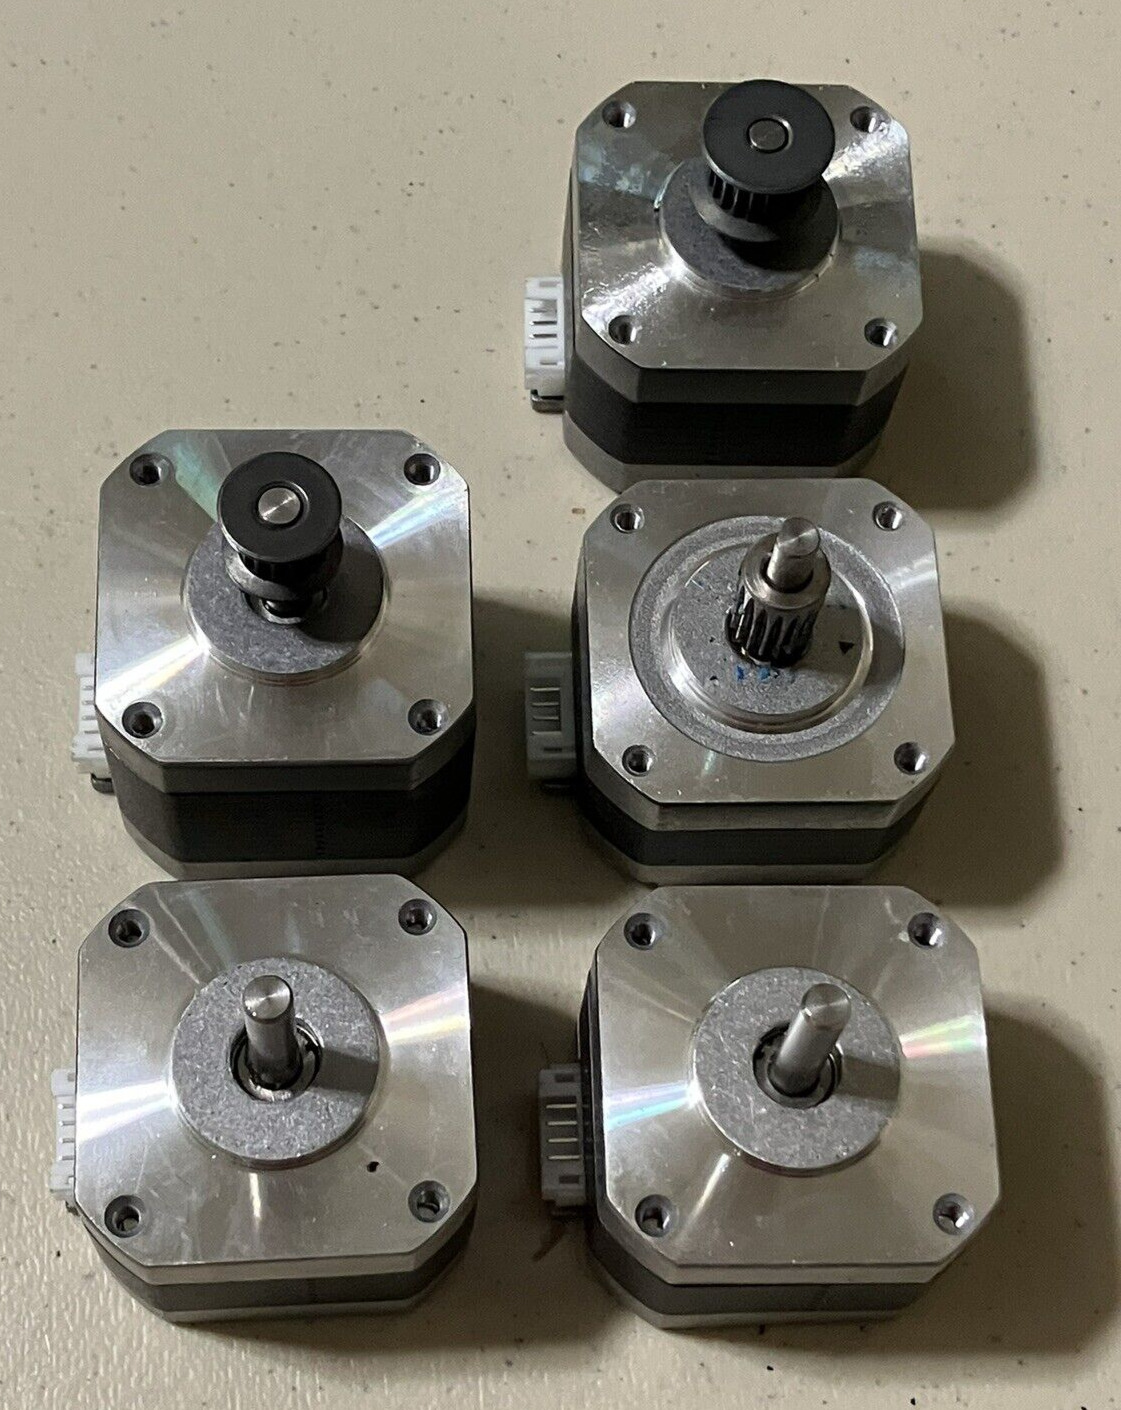 x5 Assorted Anycubic Vyper Axis Stepper Motors